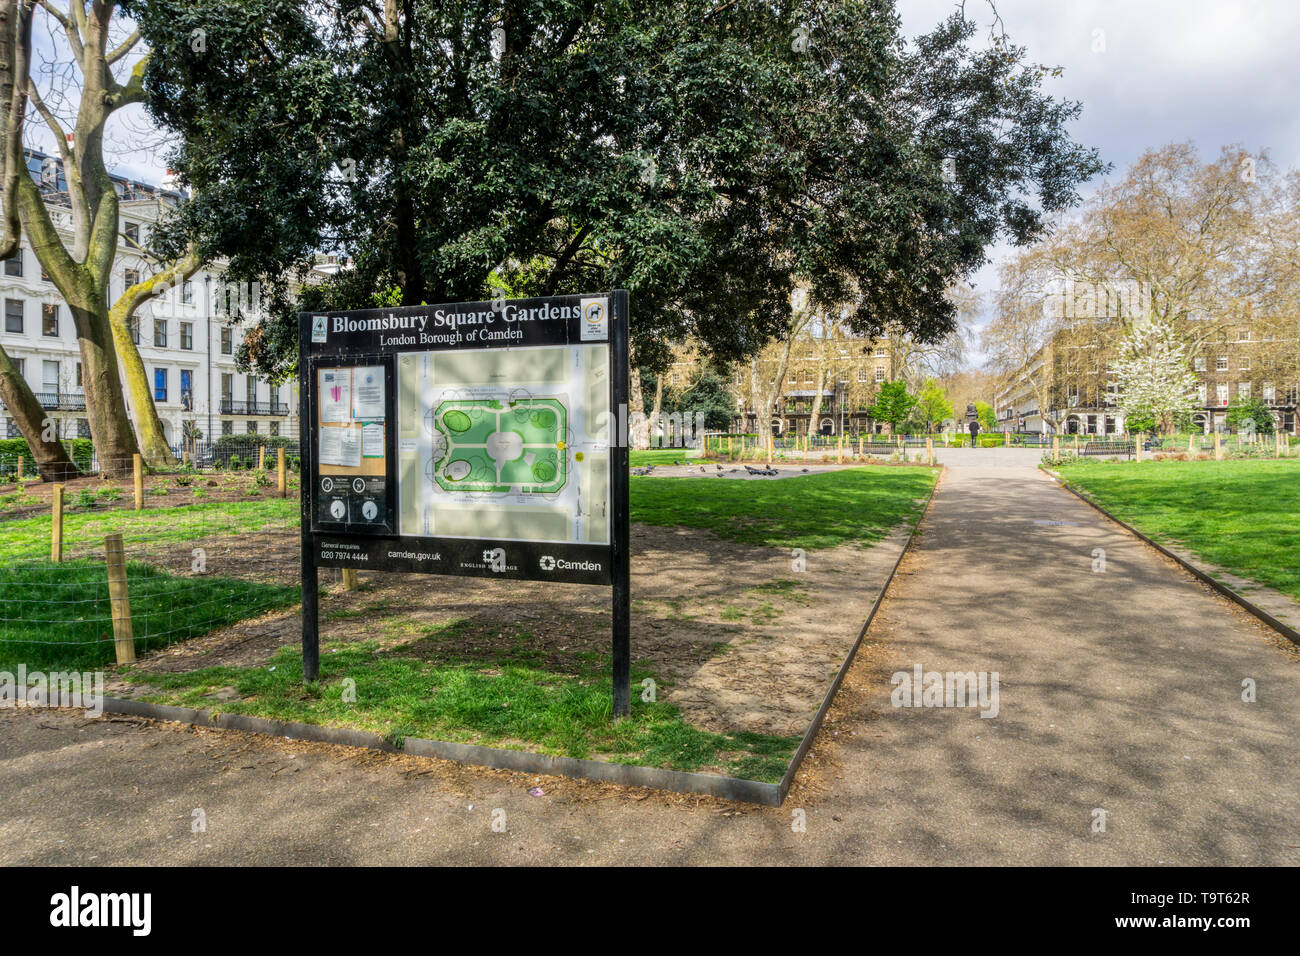 Bloomsbury Square was originally known as Southampton Square and was one of the earliest London squares being laid out in the late 17th century. Stock Photo